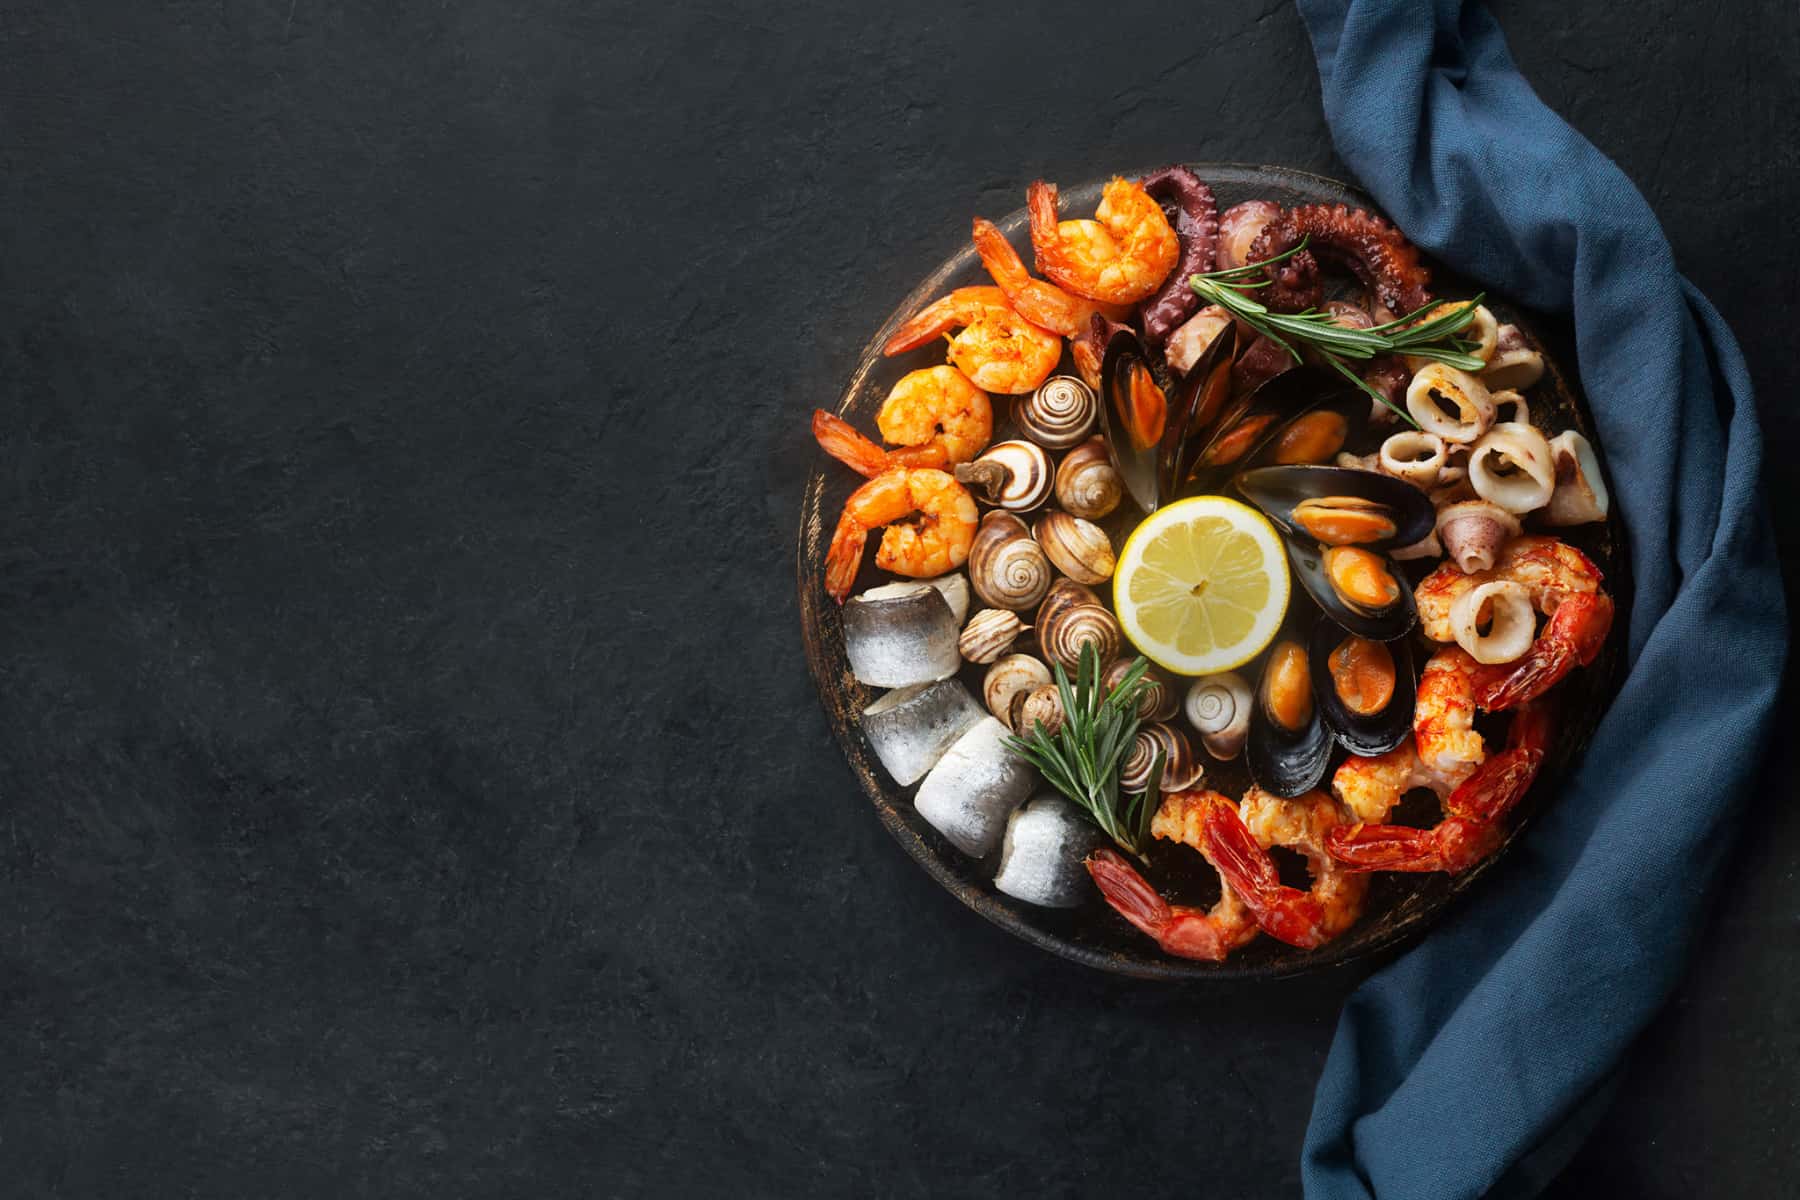 Shrimp, calamari, muscles, and octopus on a circular plate with a black background